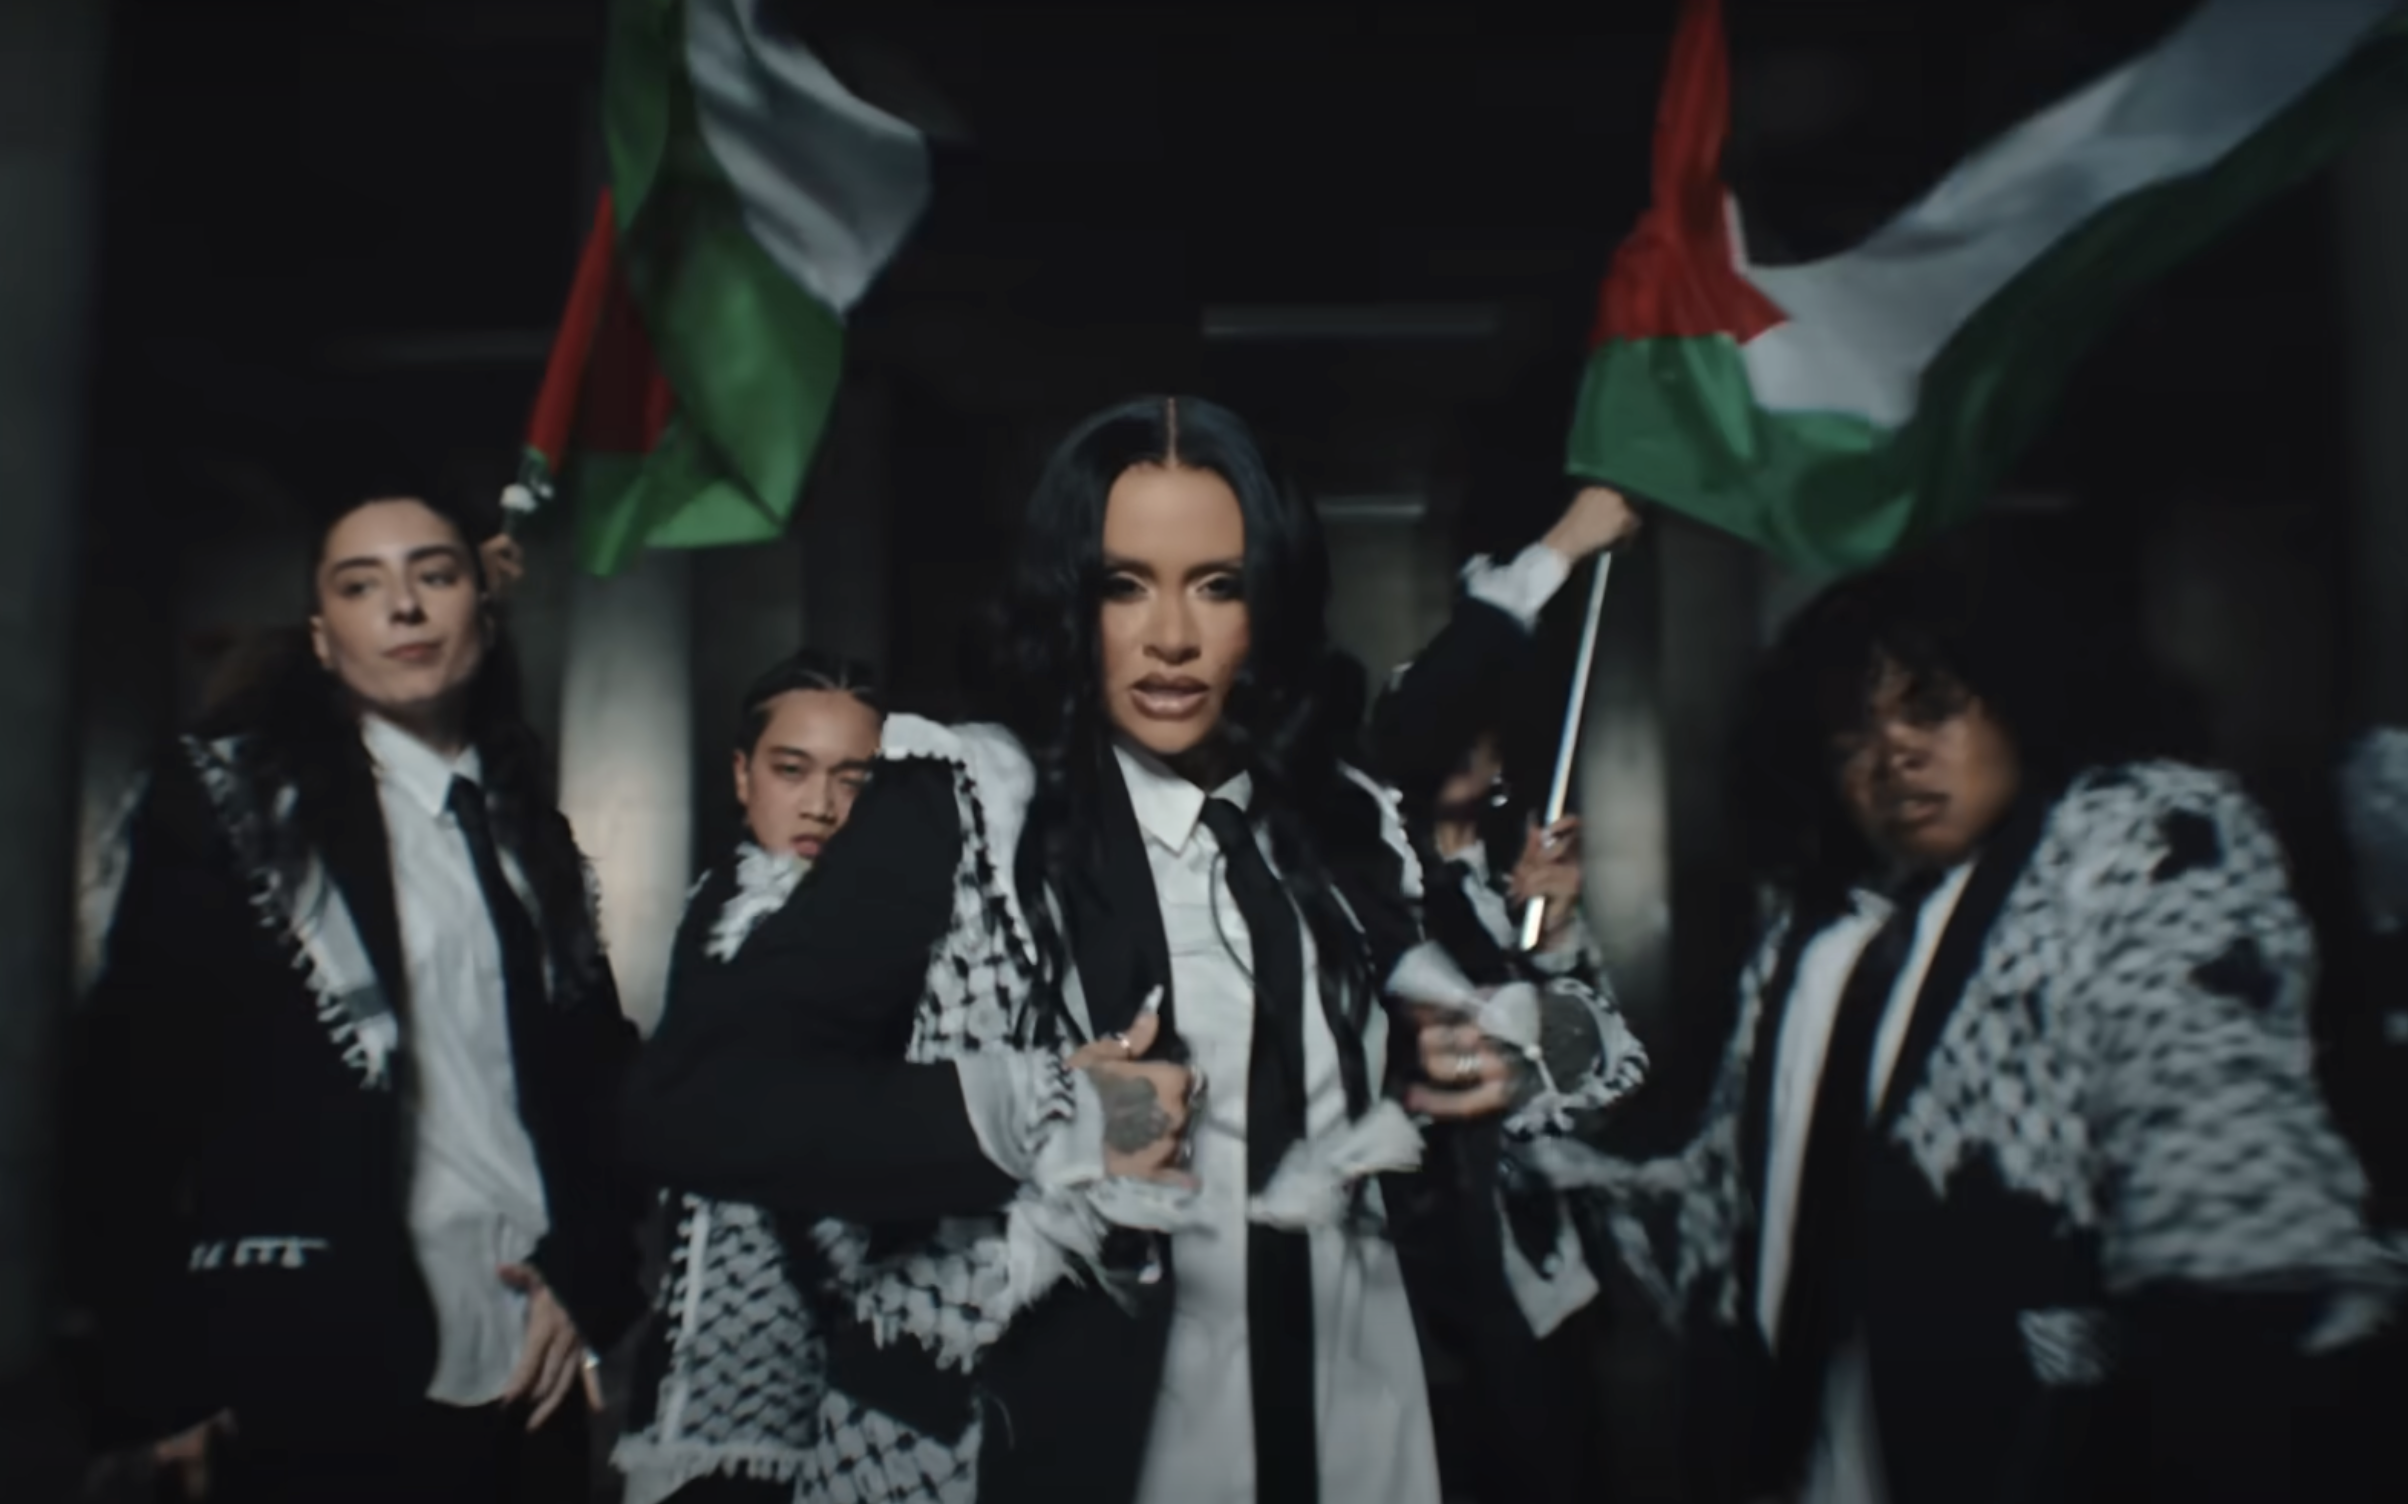 Group of people, including singer Kehlani, wearing patterned outfits and holding flags while posing confidently in what appears to be a music video scene